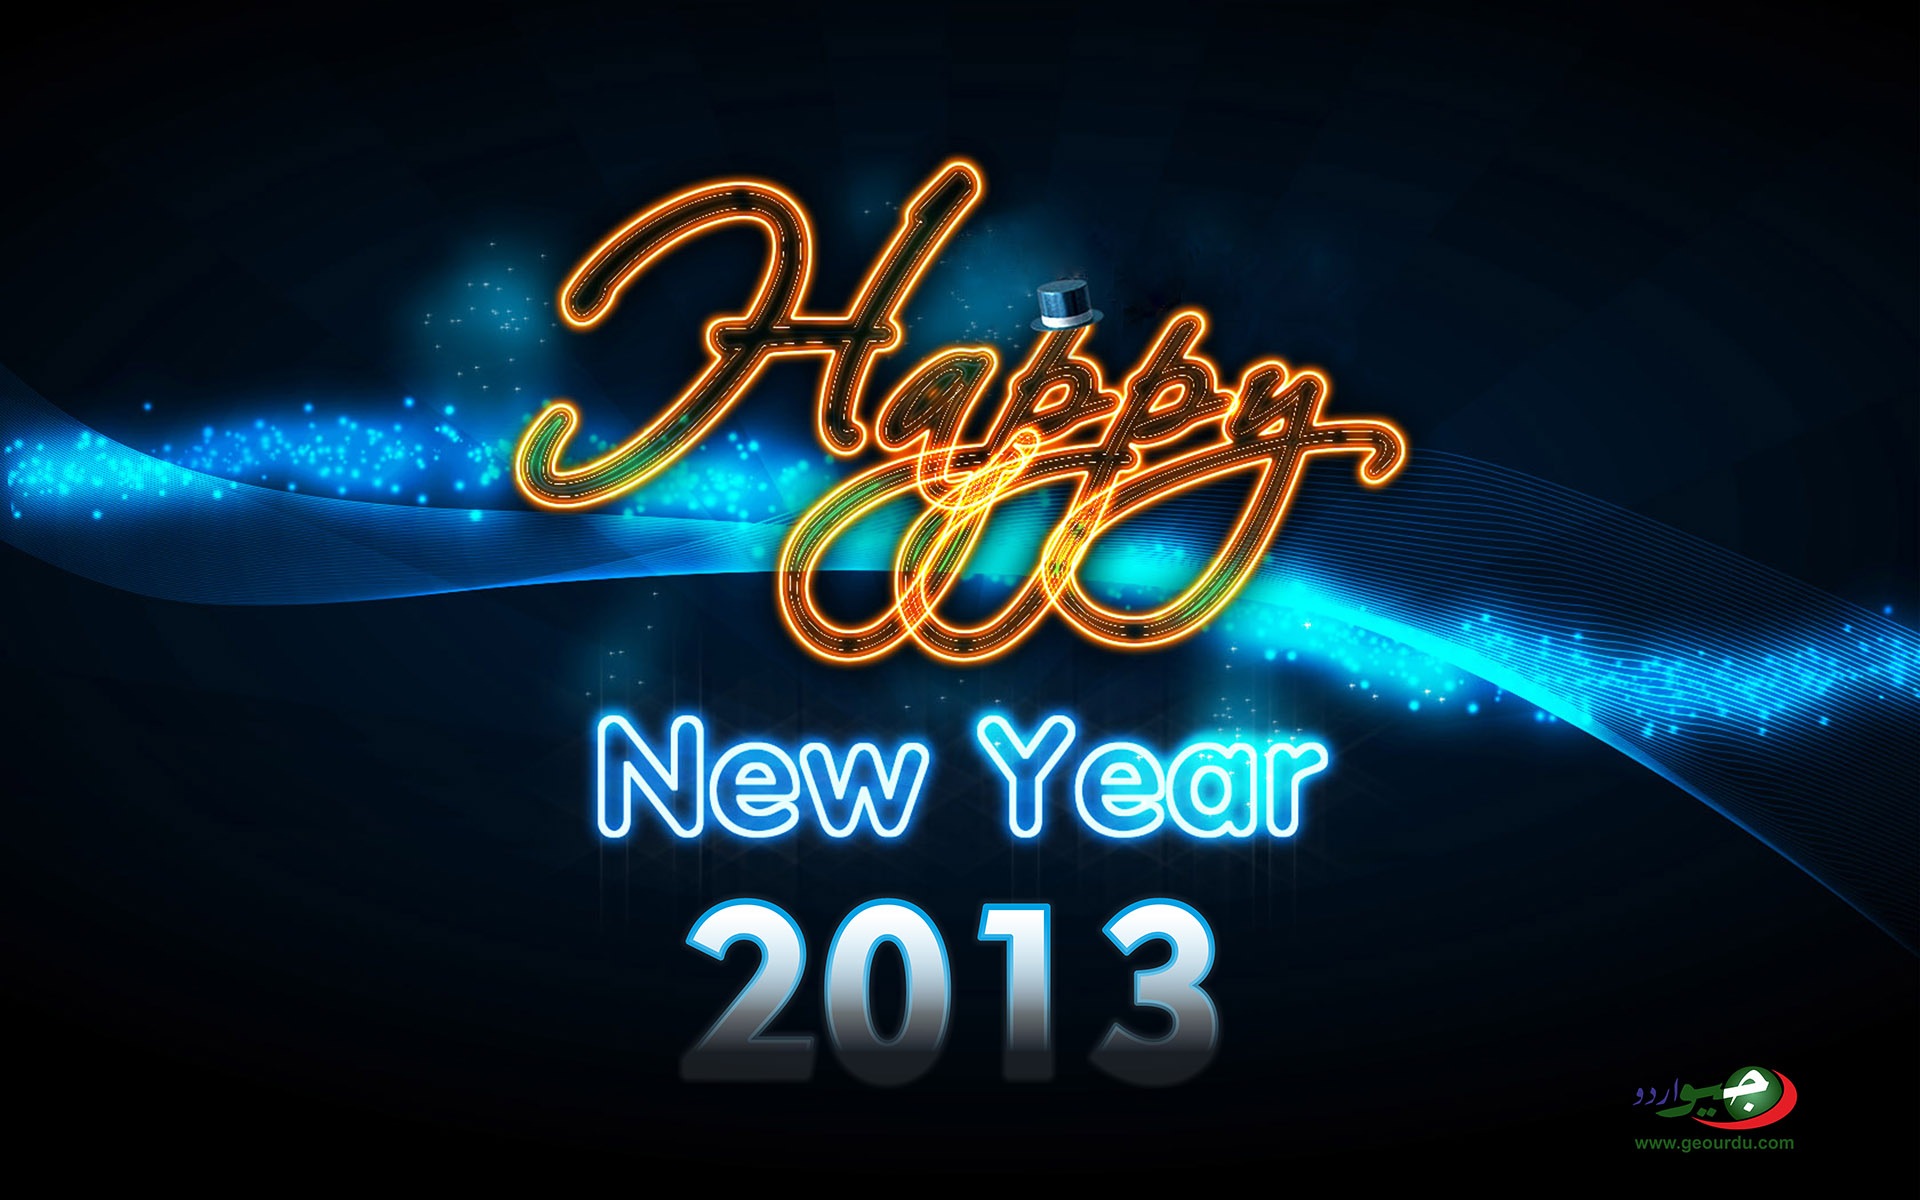 2013 Happy New Year HD wallpapers #17 - 1920x1200